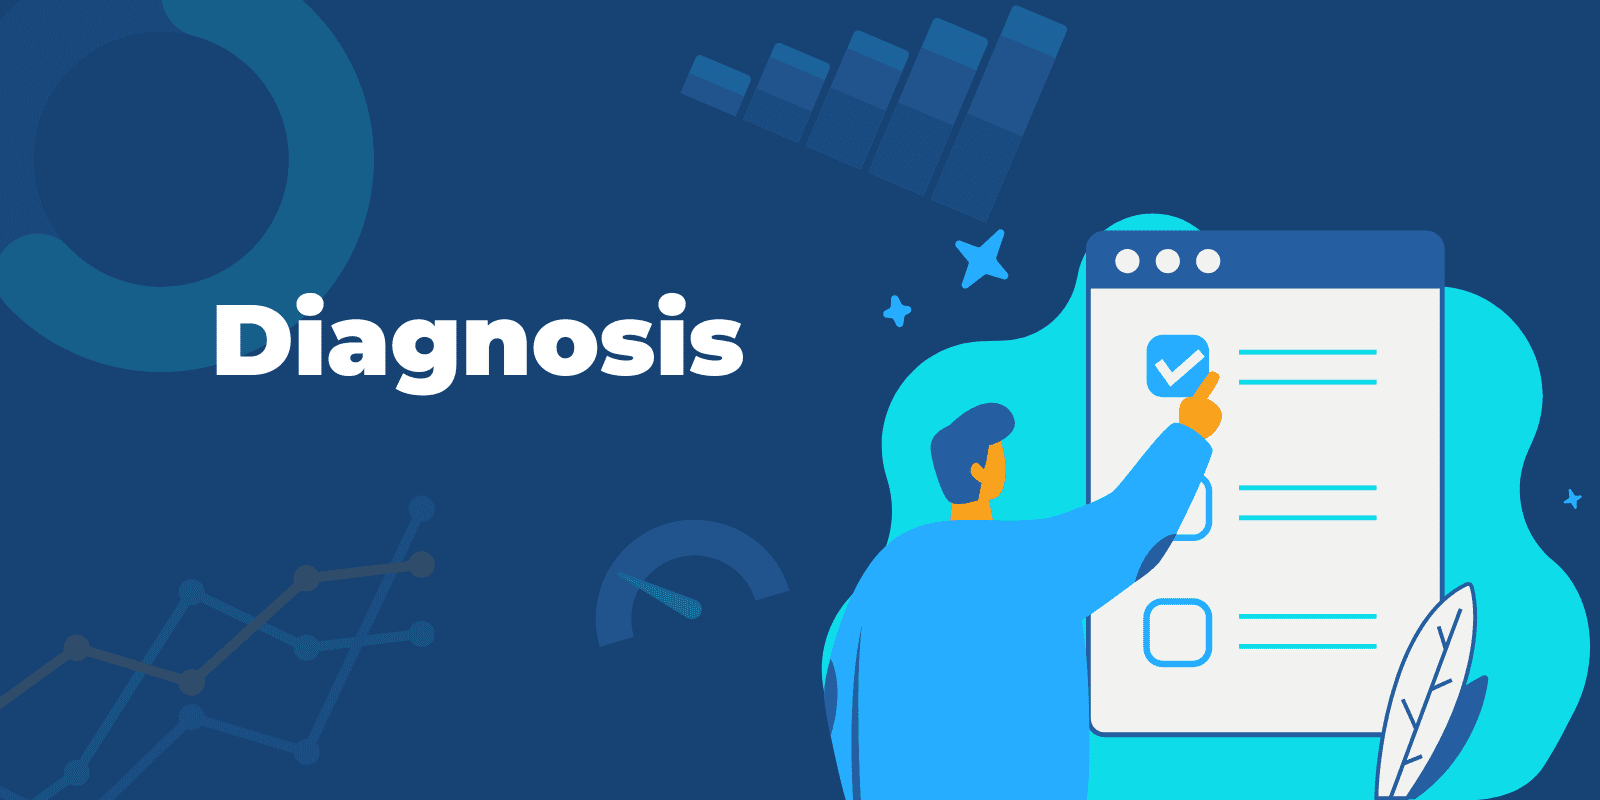 "Diagnosis" written above an Illustration of a person analyzing